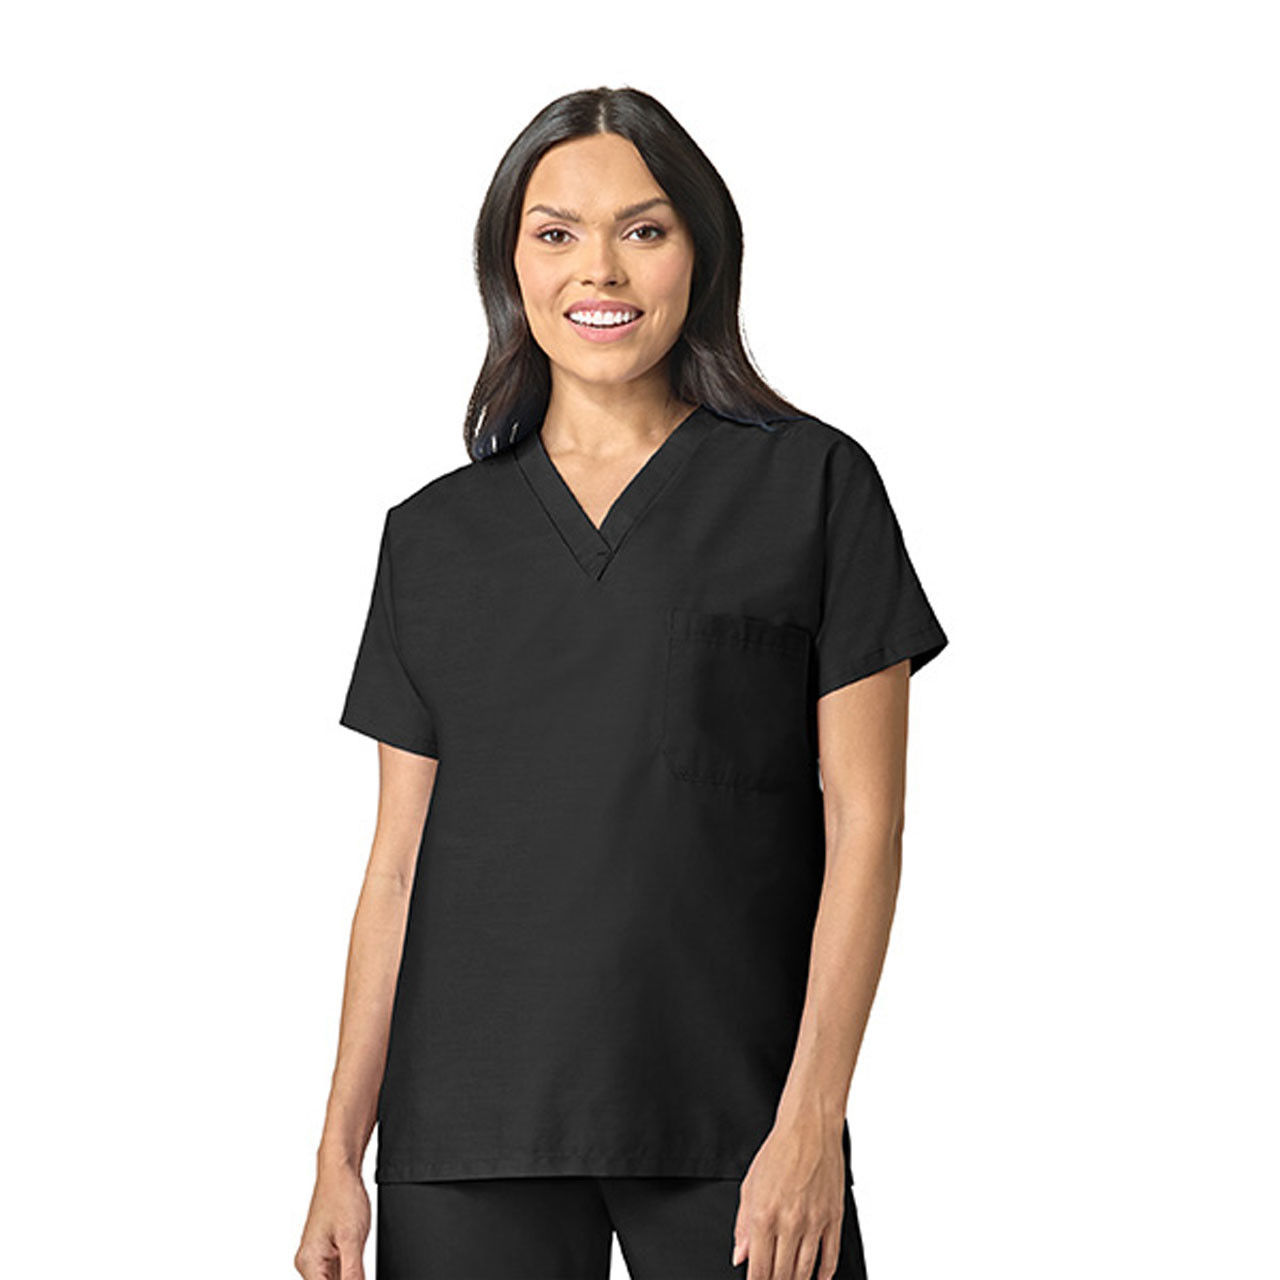 Do the Black Scrub Tops have any reinforcements?